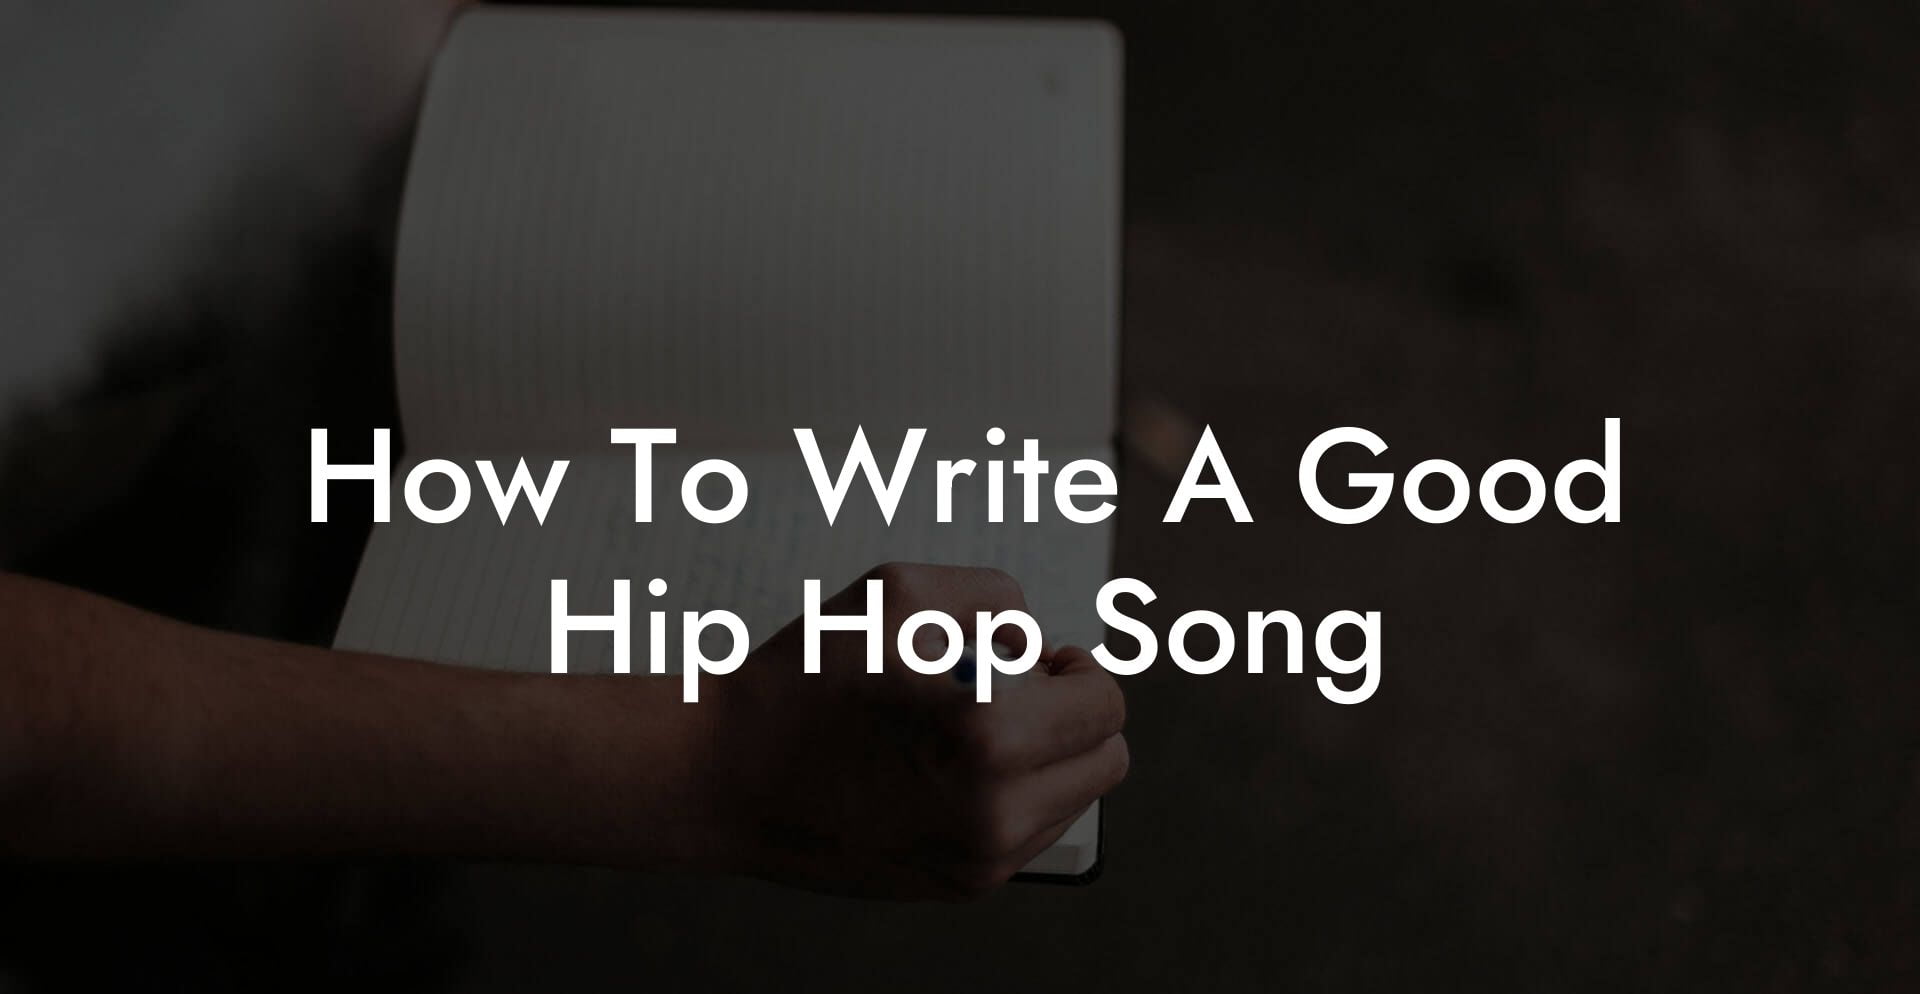 how to write a good hip hop song lyric assistant